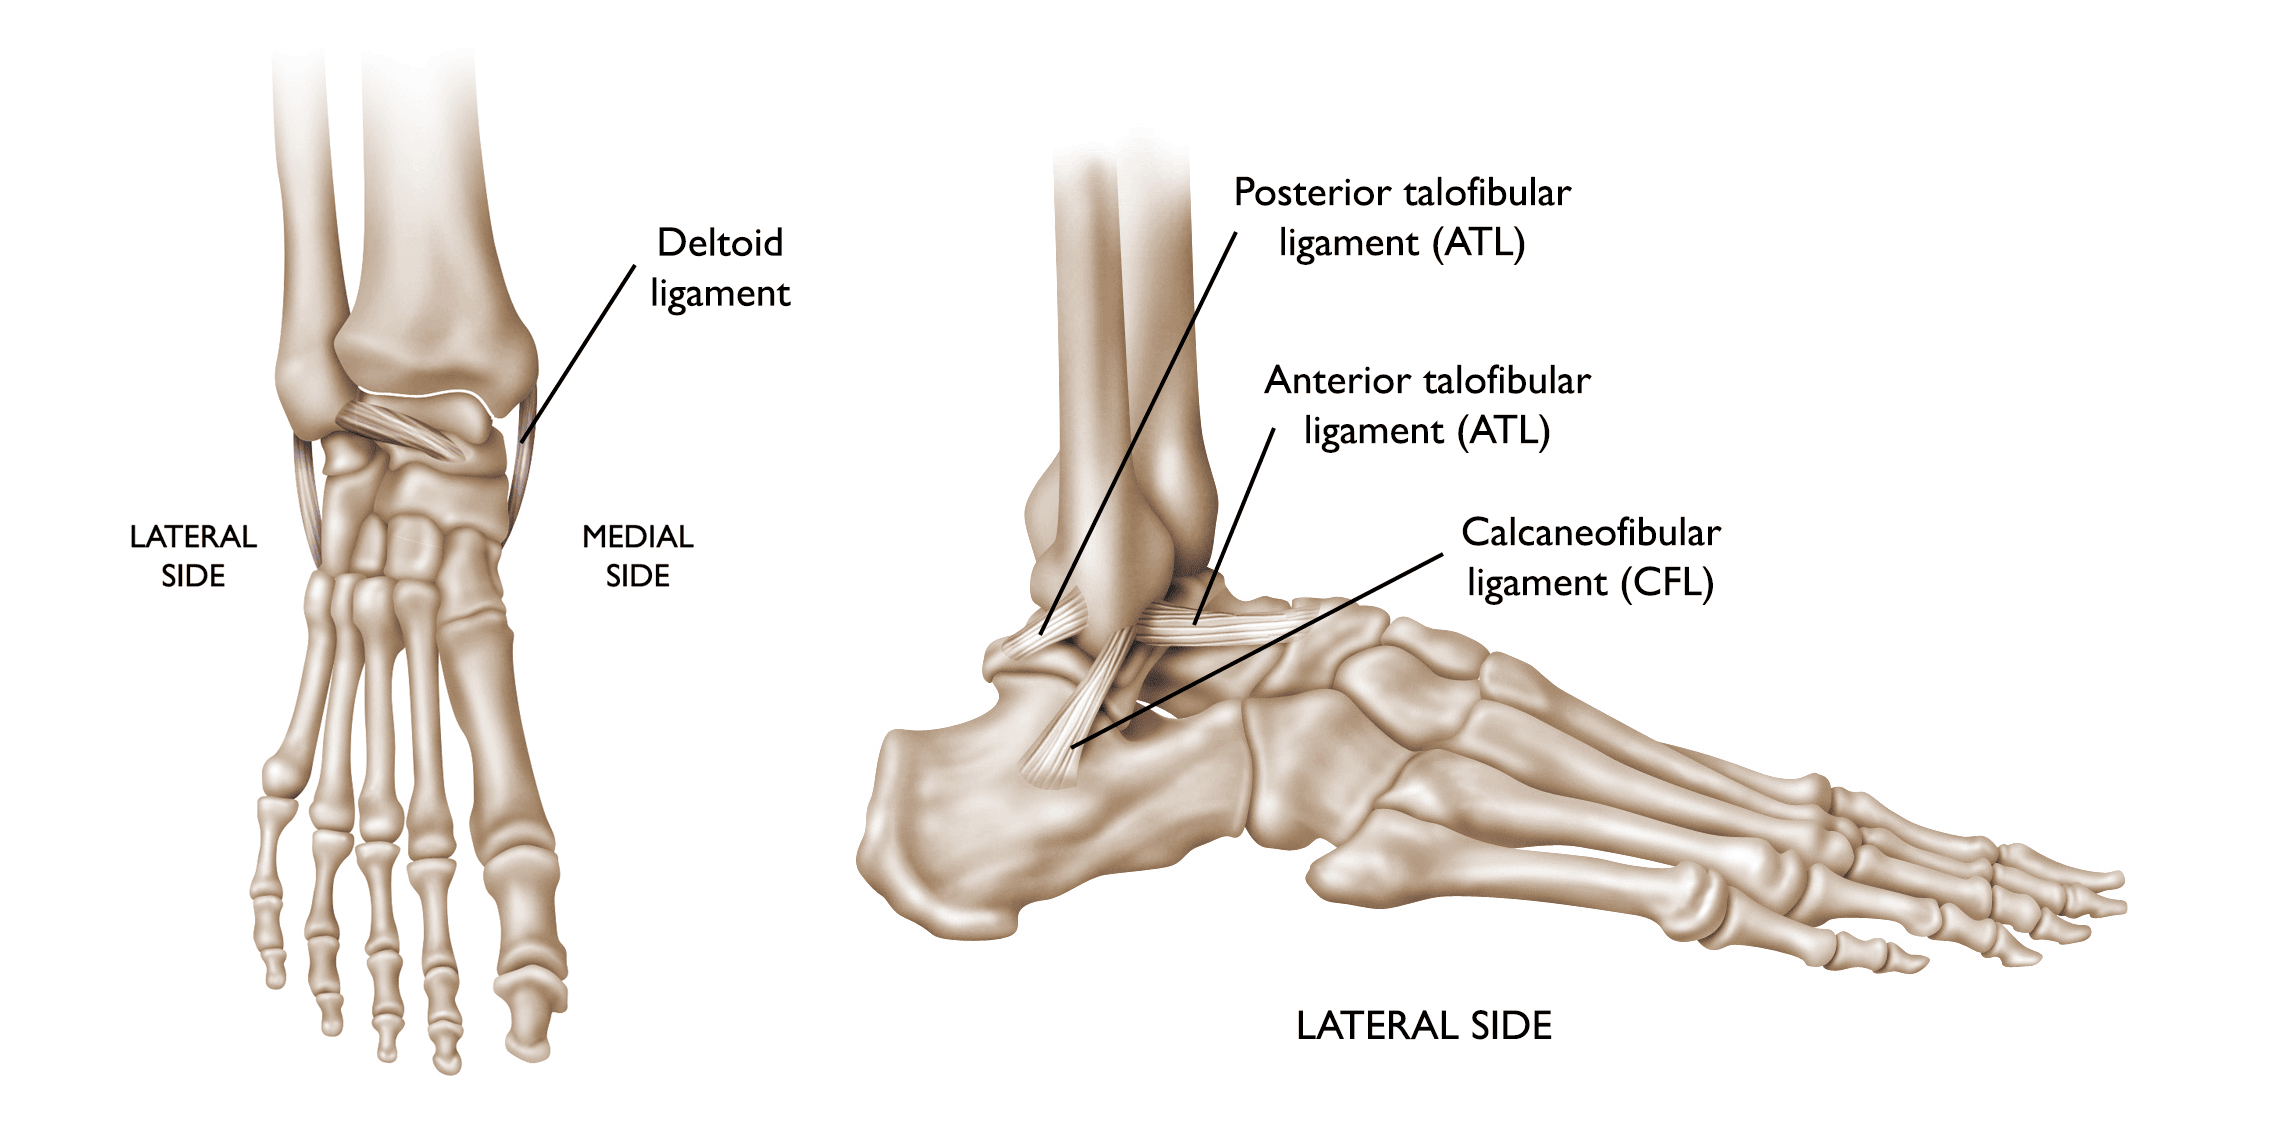 Normal anatomy of the foot and ankle